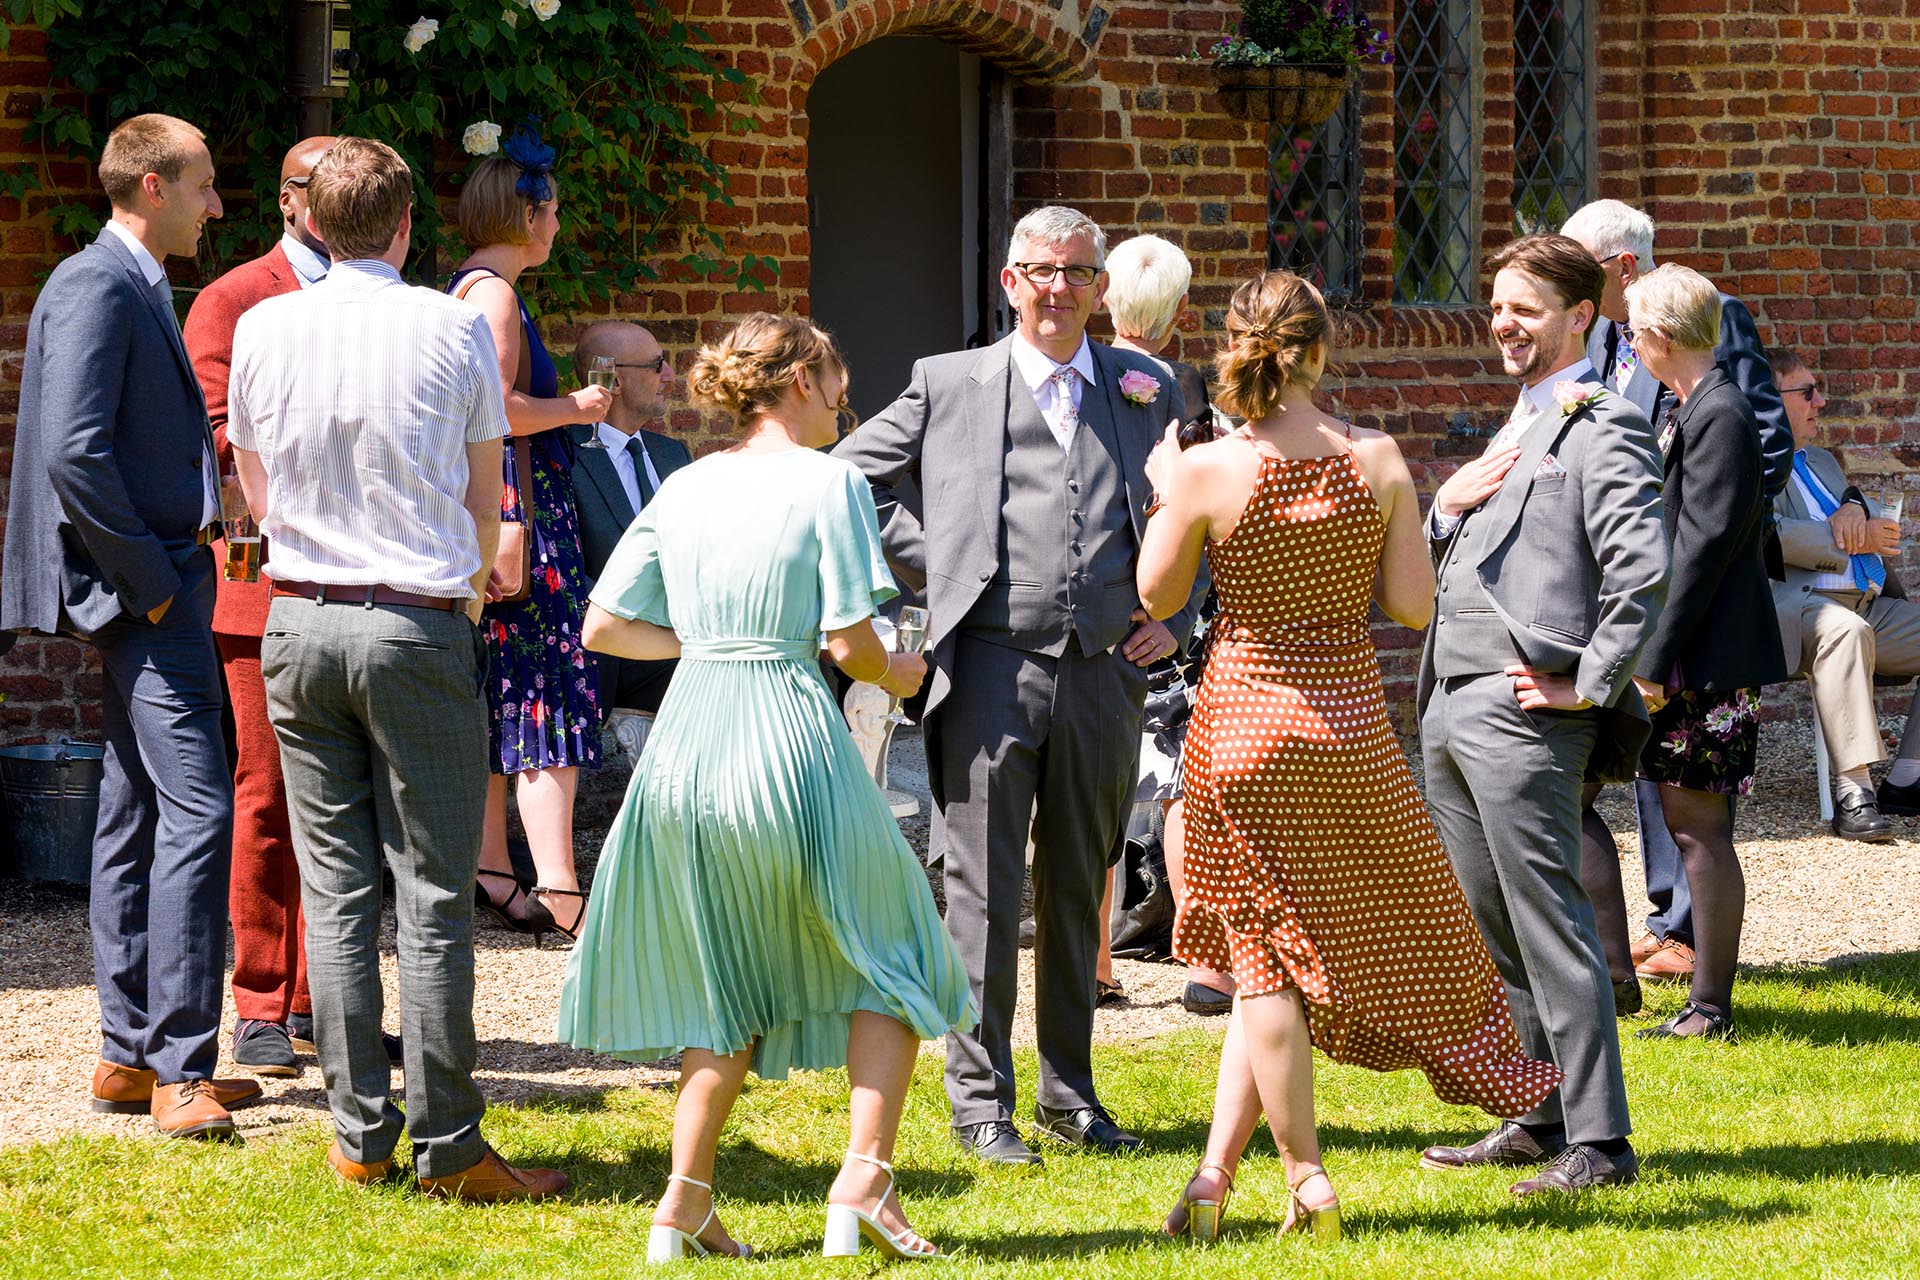 Wedding guests enjoying the summer sunshine at Leez Priory, Great Leighs, Chelmsford